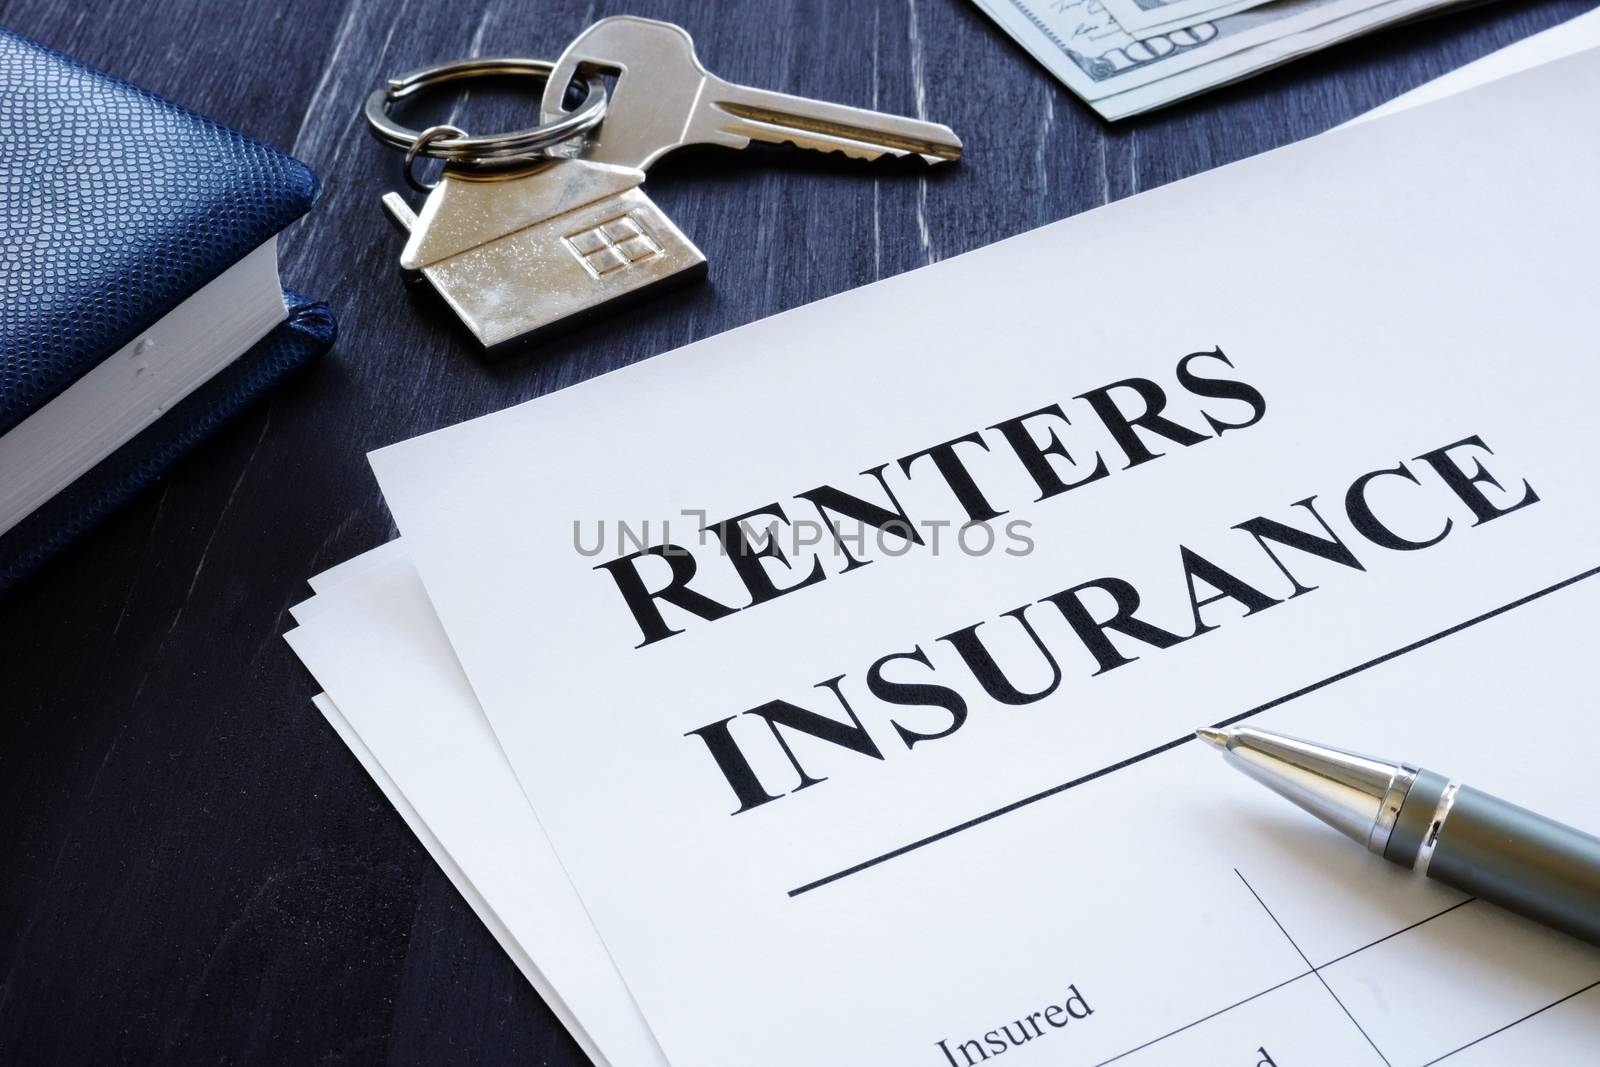 Renters Insurance policy agreement and key from apartments. by designer491